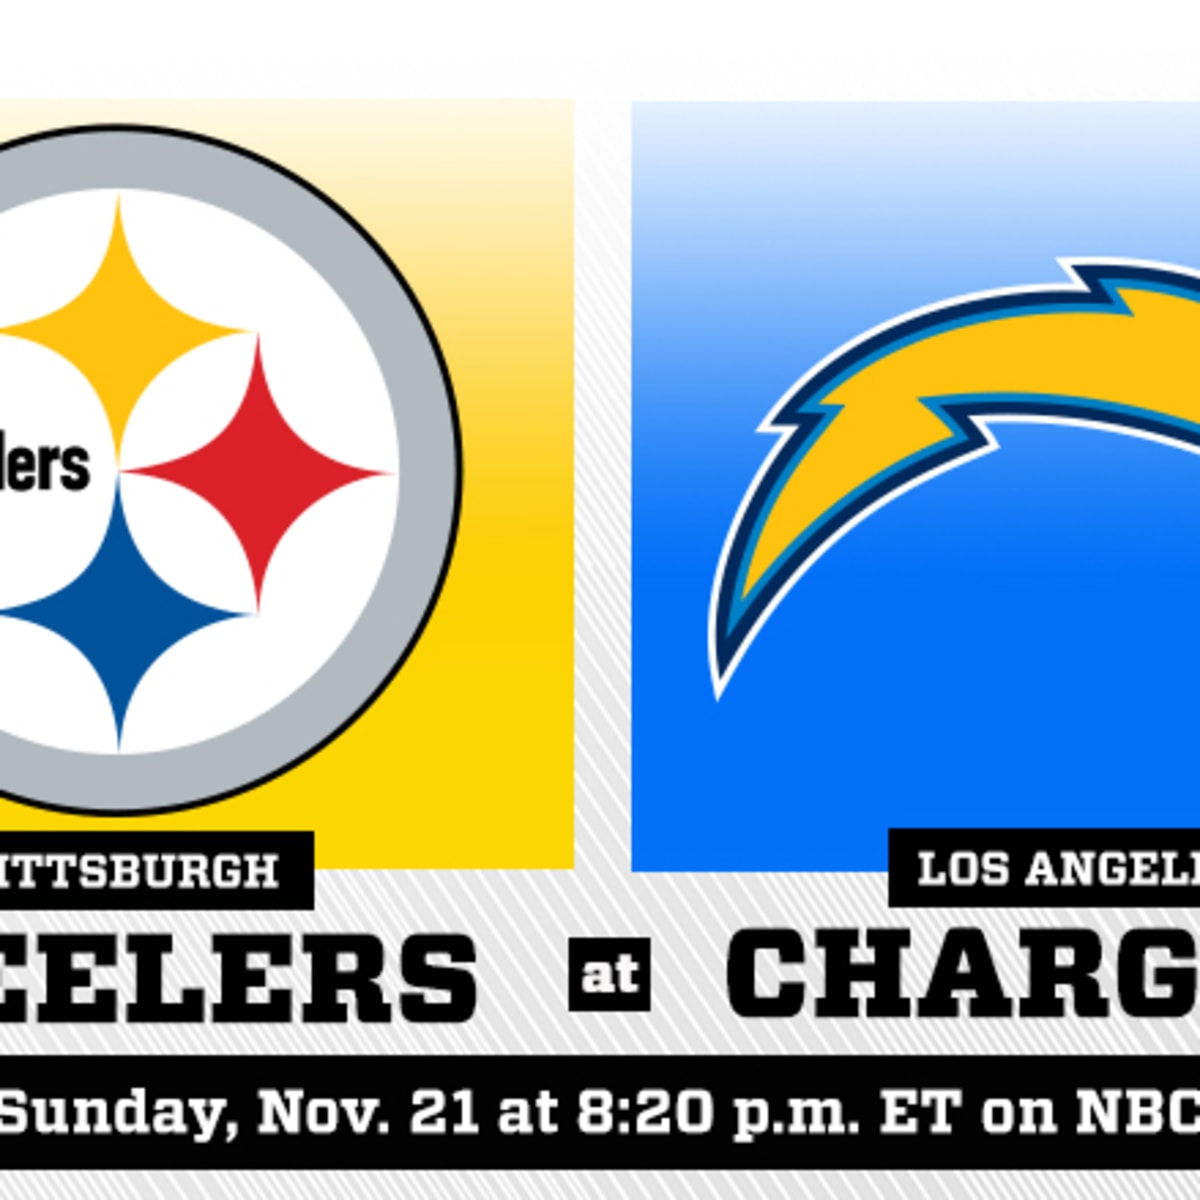 Chargers-Steelers final score: Los Angeles Chargers lose to the